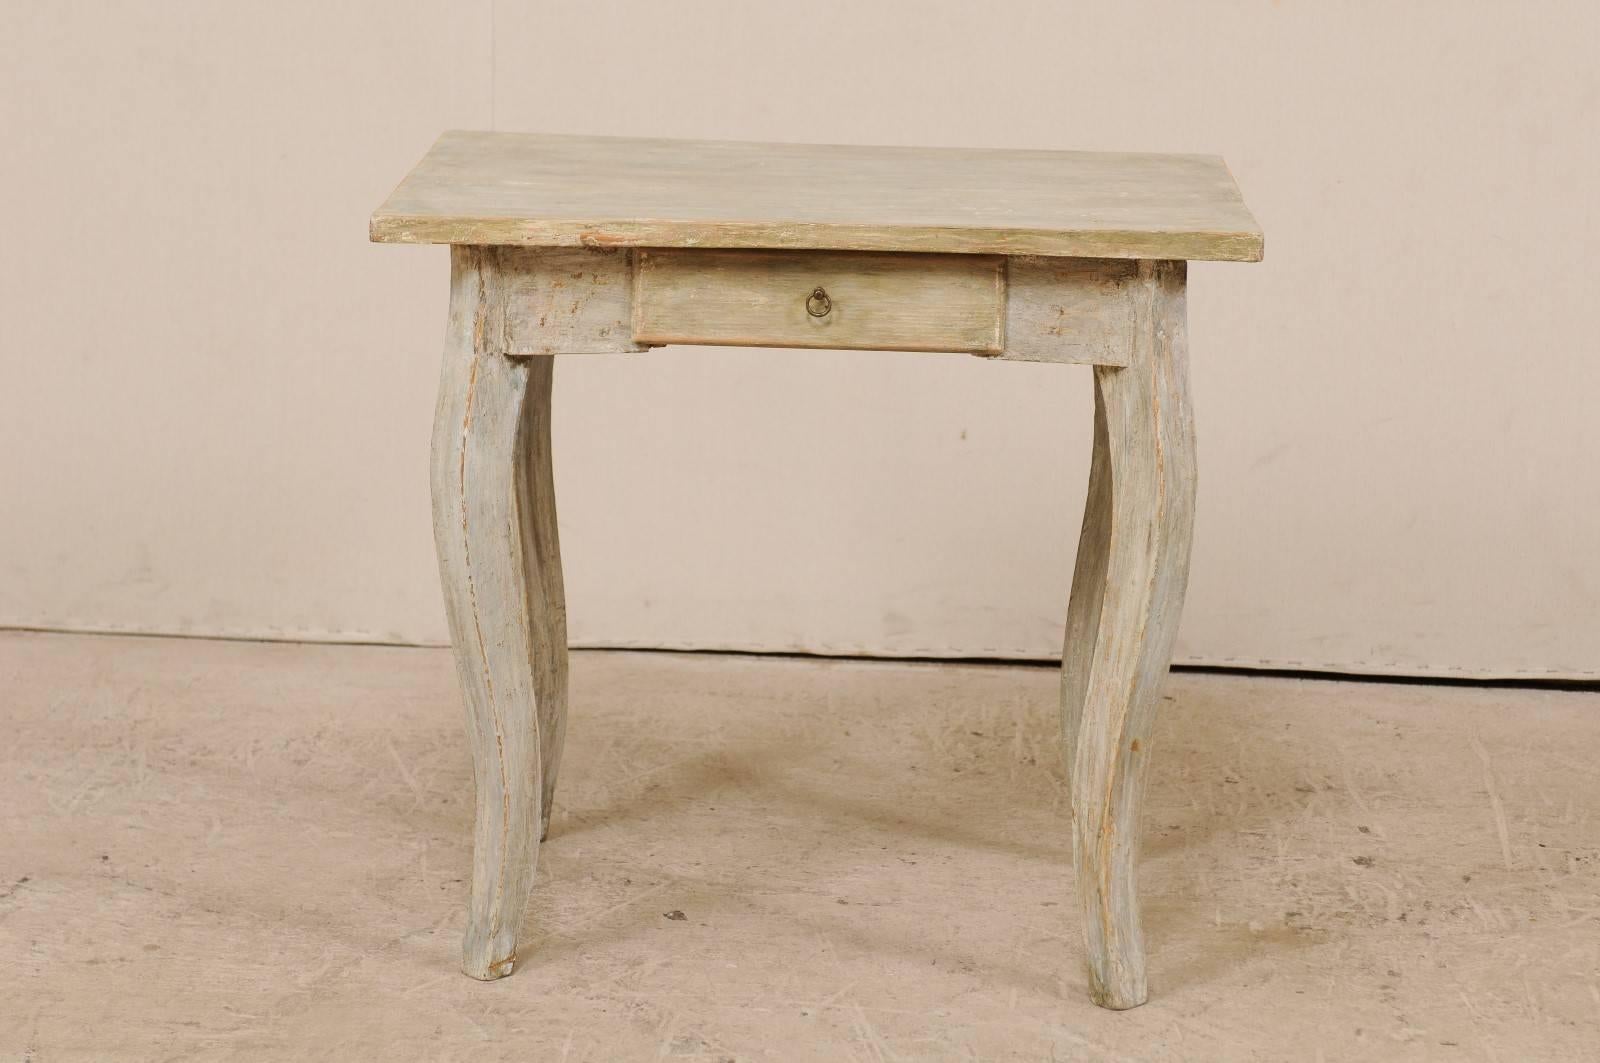 A late 19th century European painted wood side table. This antique table from Europe features a single-drawer with petite ring pull, a rectangular-shaped overhung top, and squared cabriole style legs. This table has washes of grey, blue, green and